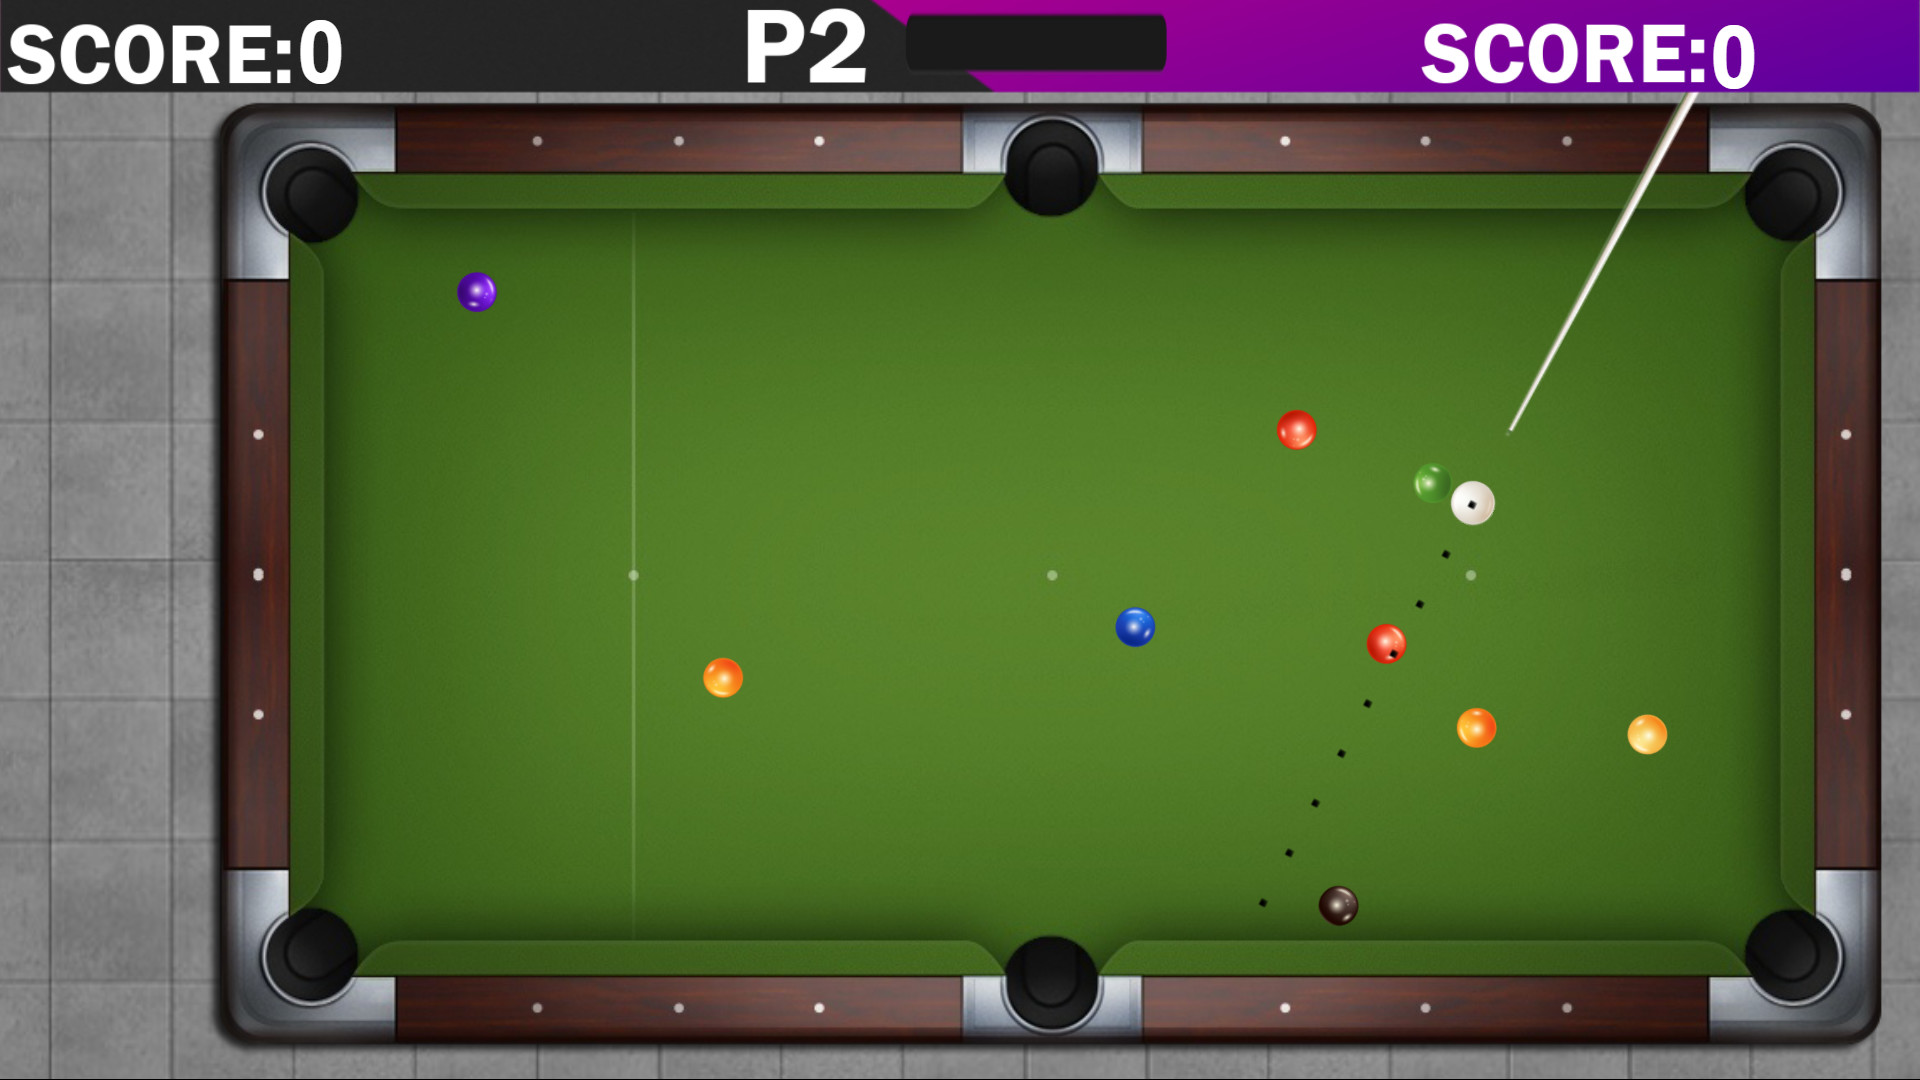 3D Billiards: Pool & Snooker Remastered - Sony PlayStation 5 for sale online